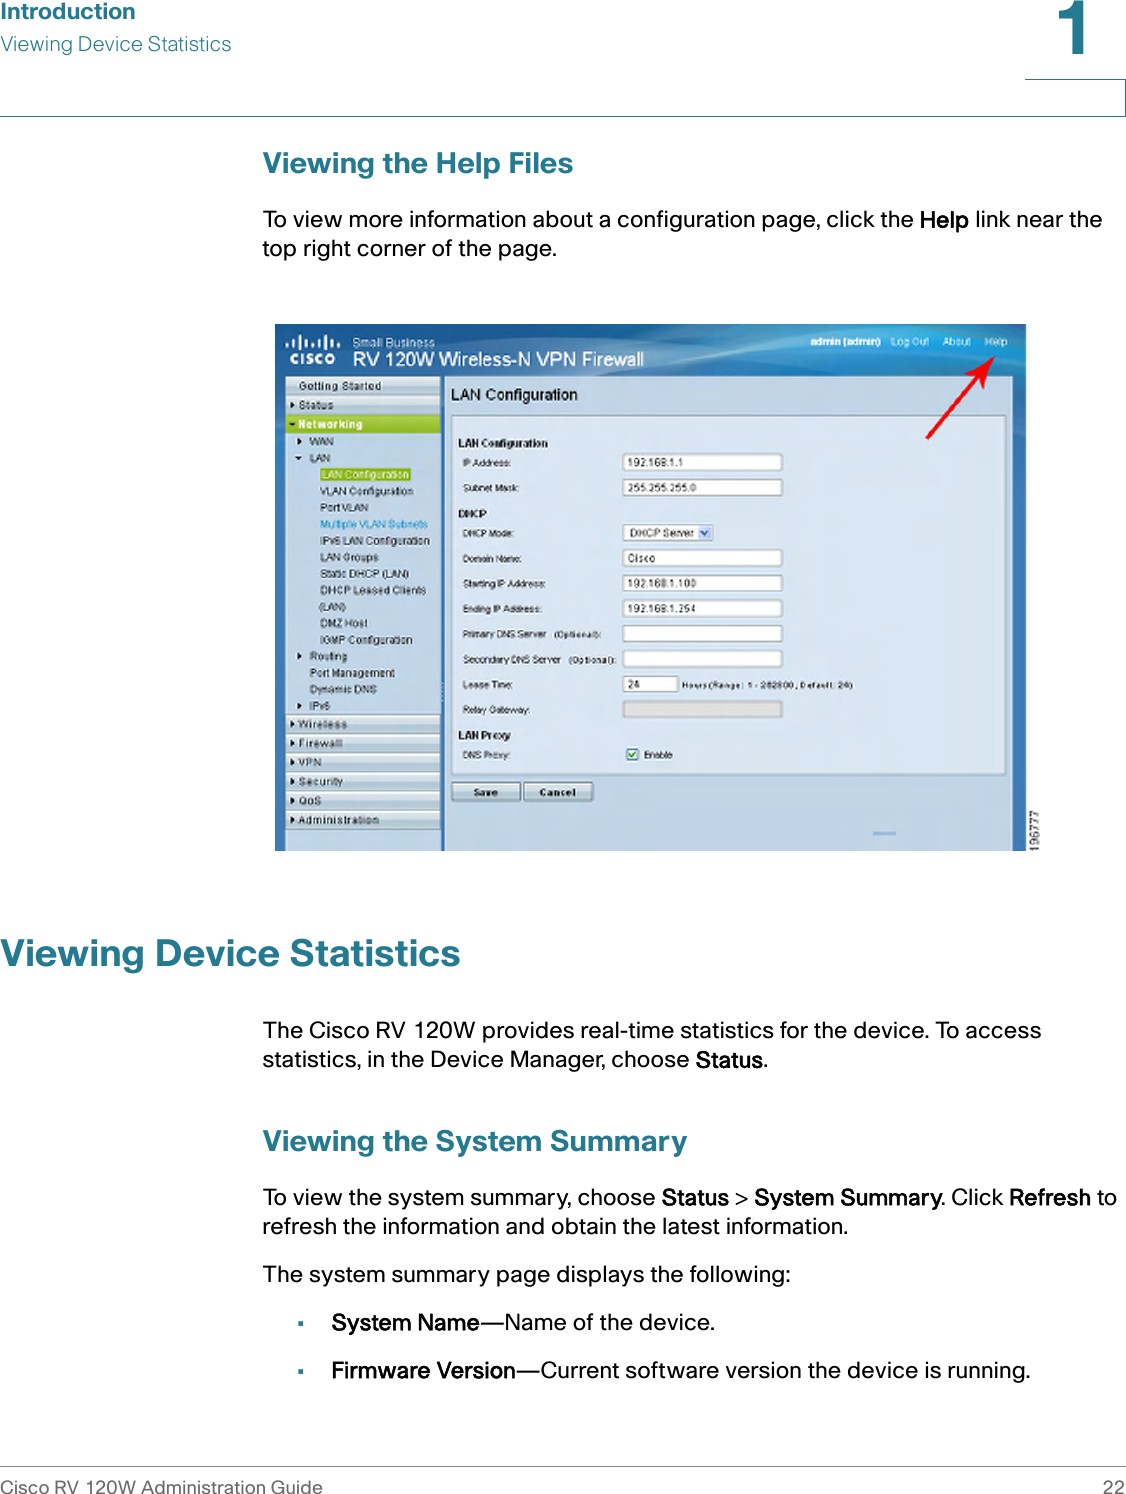 IntroductionViewing Device StatisticsCisco RV 120W Administration Guide 221 Viewing the Help FilesTo view more information about a configuration page, click the Help link near the top right corner of the page.Viewing Device StatisticsThe Cisco RV 120W provides real-time statistics for the device. To access statistics, in the Device Manager, choose Status. Viewing the System SummaryTo view the system summary, choose Status &gt; System Summary. Click Refresh to refresh the information and obtain the latest information.The system summary page displays the following:•System Name—Name of the device.•Firmware Version—Current software version the device is running.